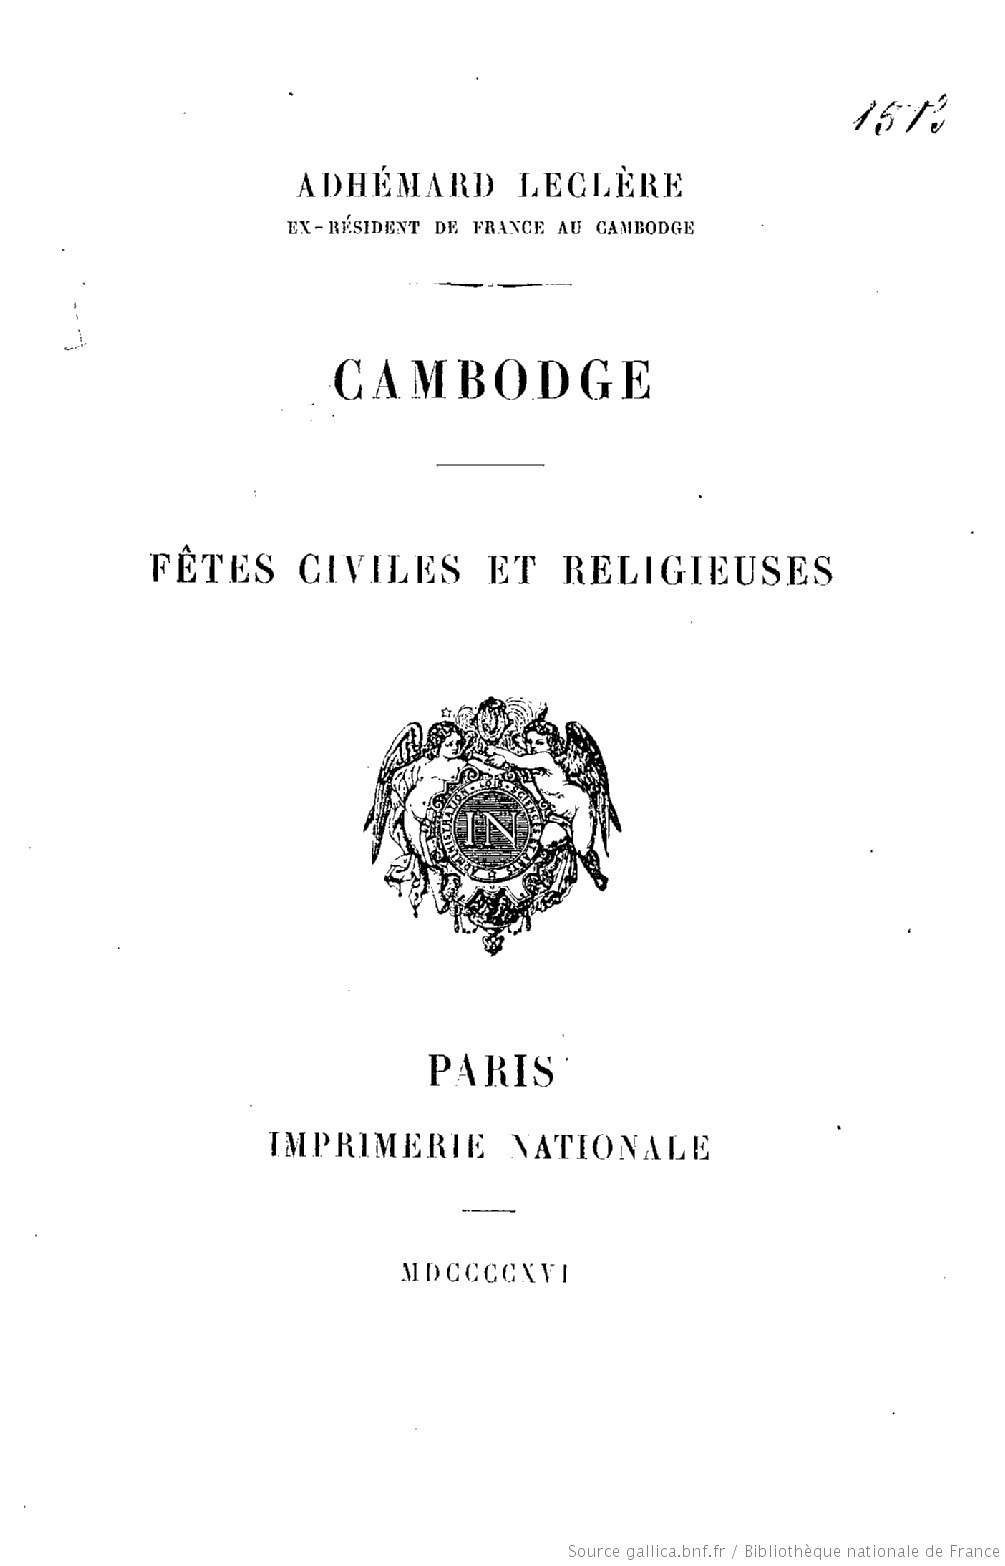 First page of a book about Cambodia